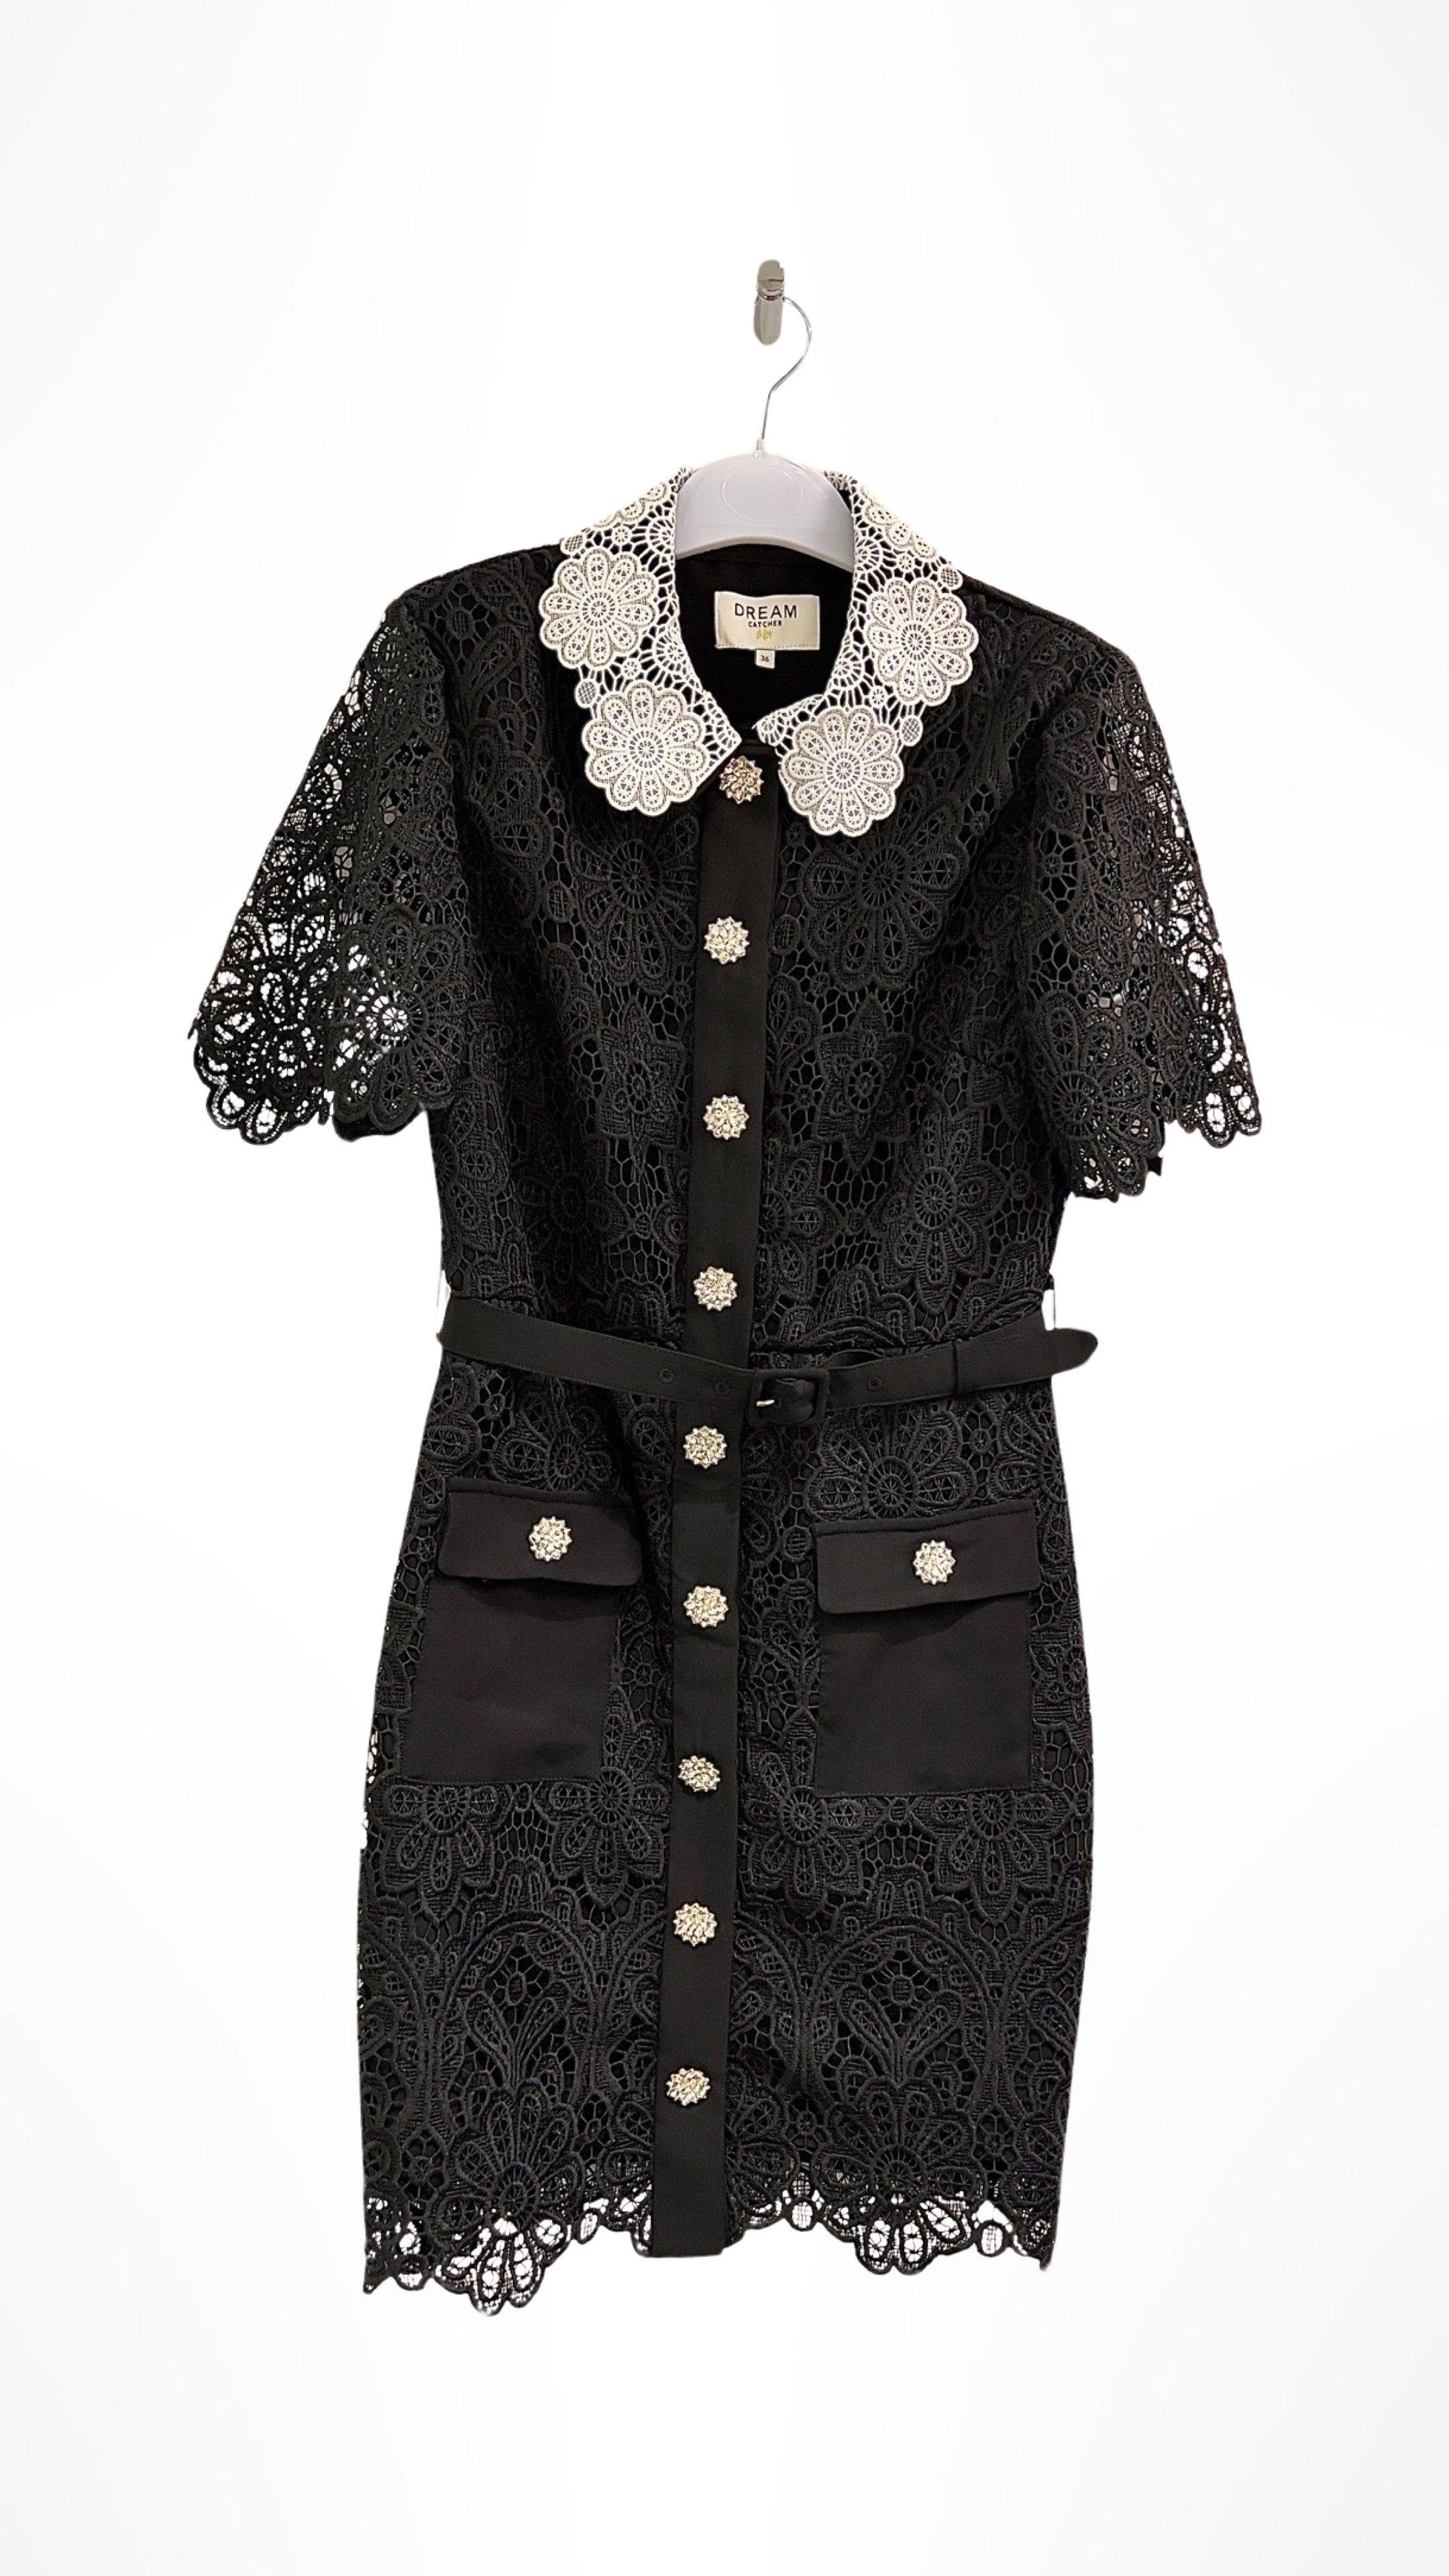 Elegant black lace dress with a distinctive white lace collar, short lace sleeves, and a row of decorative buttons down the front, displayed on a hanger  - BTK COLLECTION